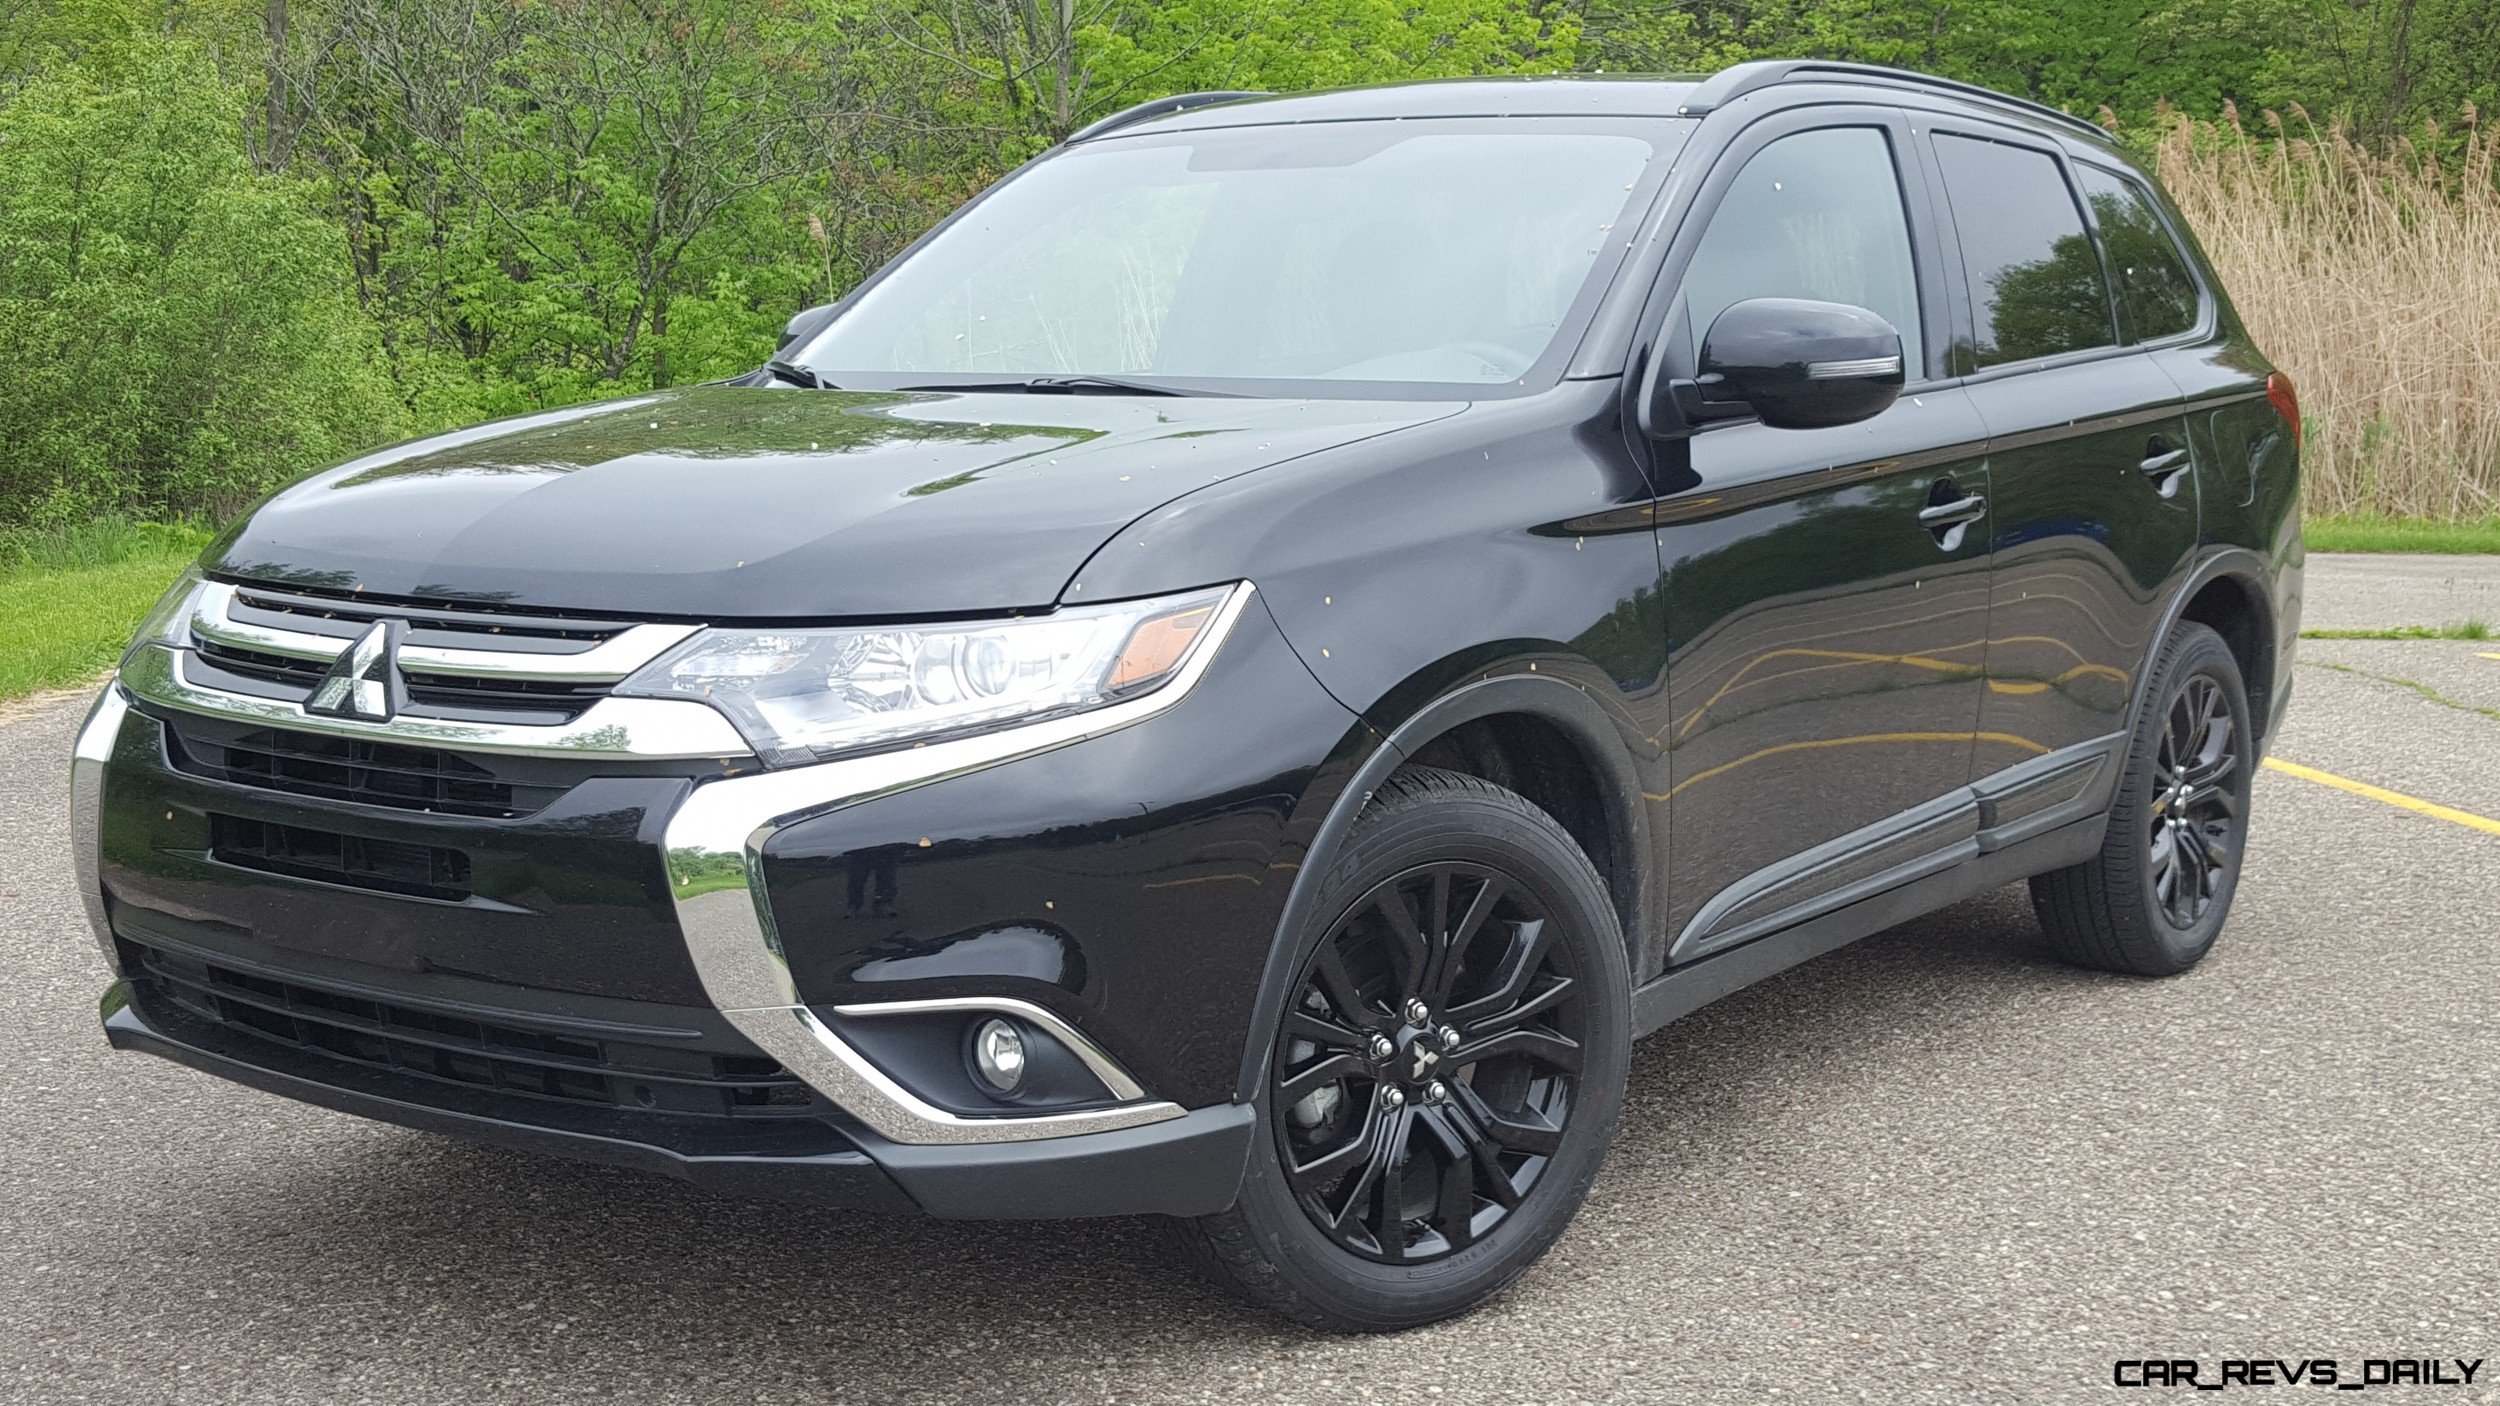 Road Test Review - 2018 Mitsubishi Outlander LE 2.4 S-AWC - By Carl Malek »  ROAD TEST REVIEWS » Car-Revs-Daily.com